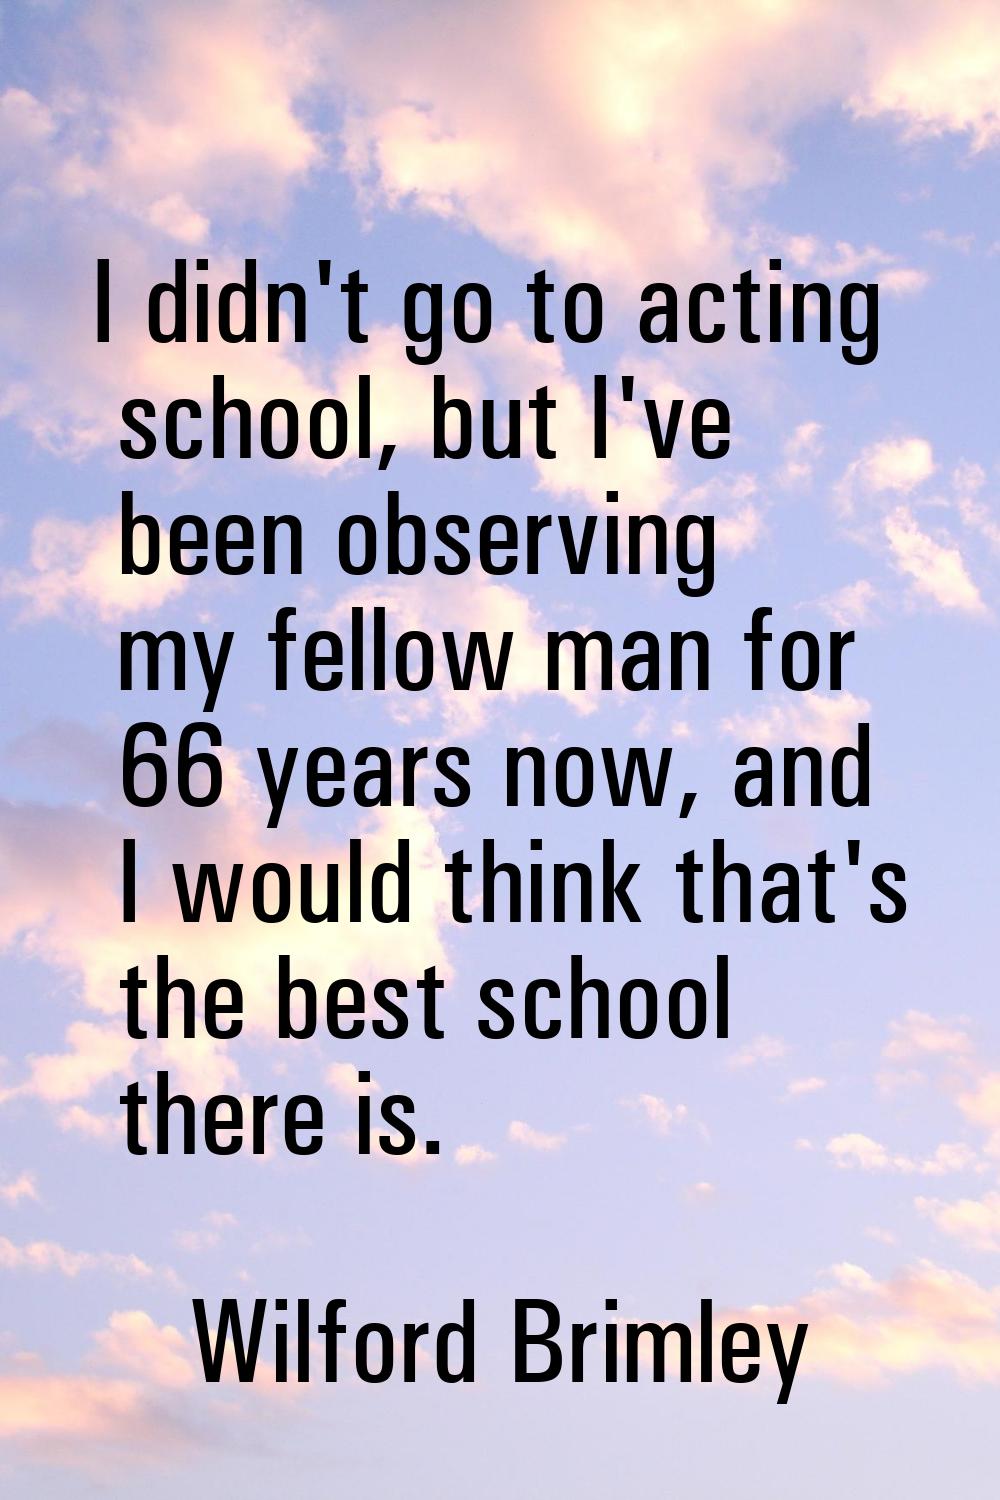 I didn't go to acting school, but I've been observing my fellow man for 66 years now, and I would t